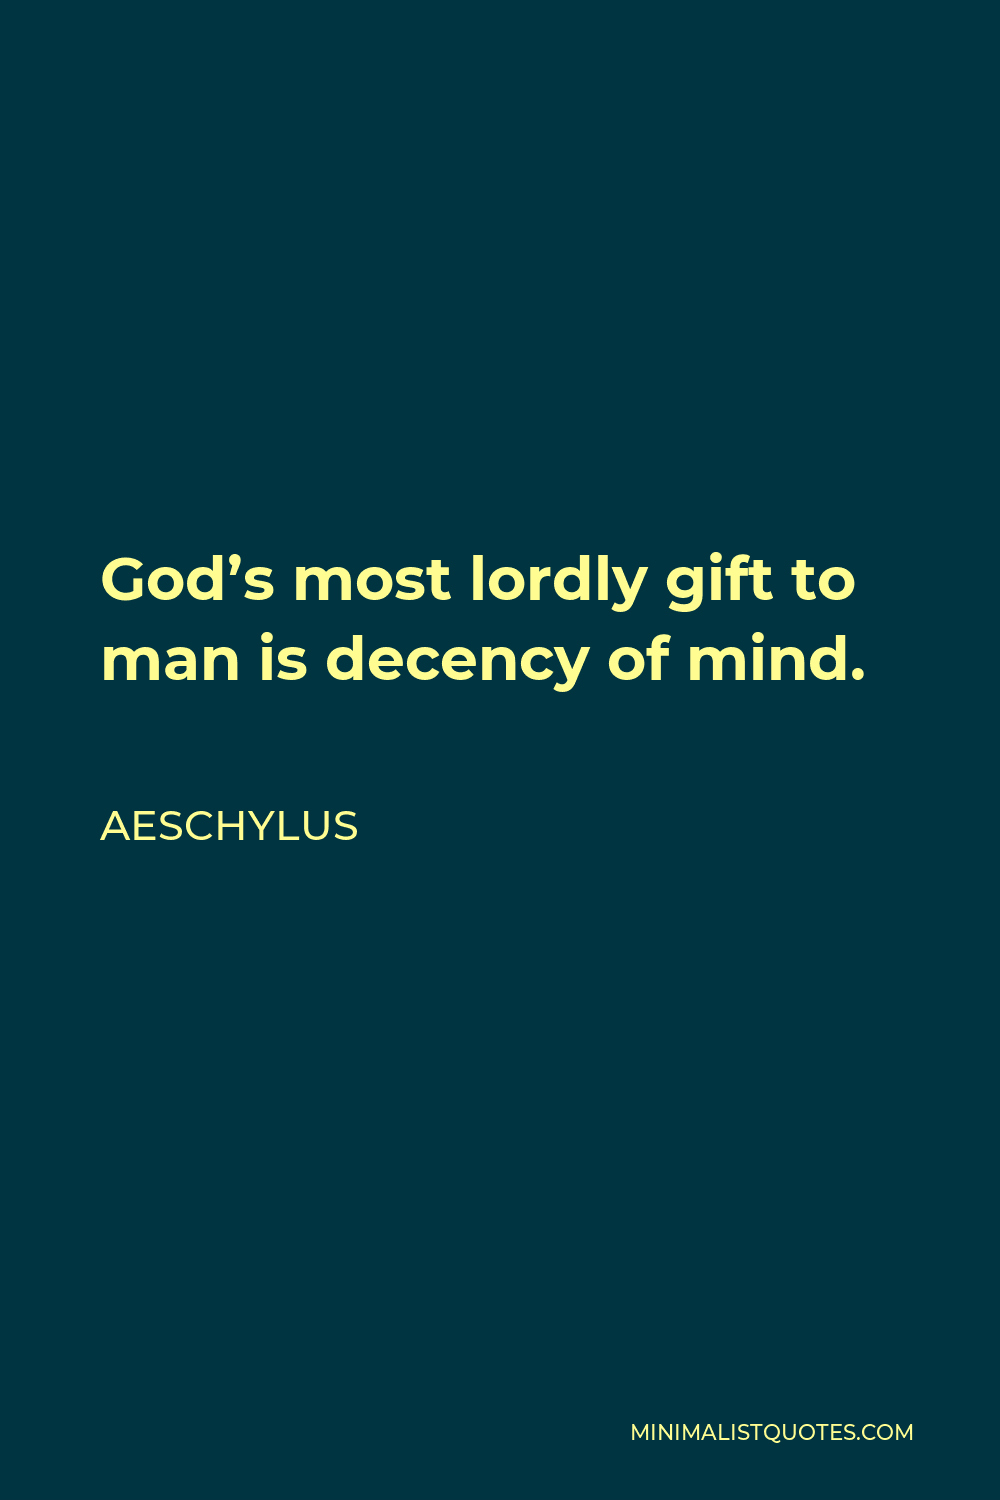 Aeschylus Quote - God’s most lordly gift to man is decency of mind.